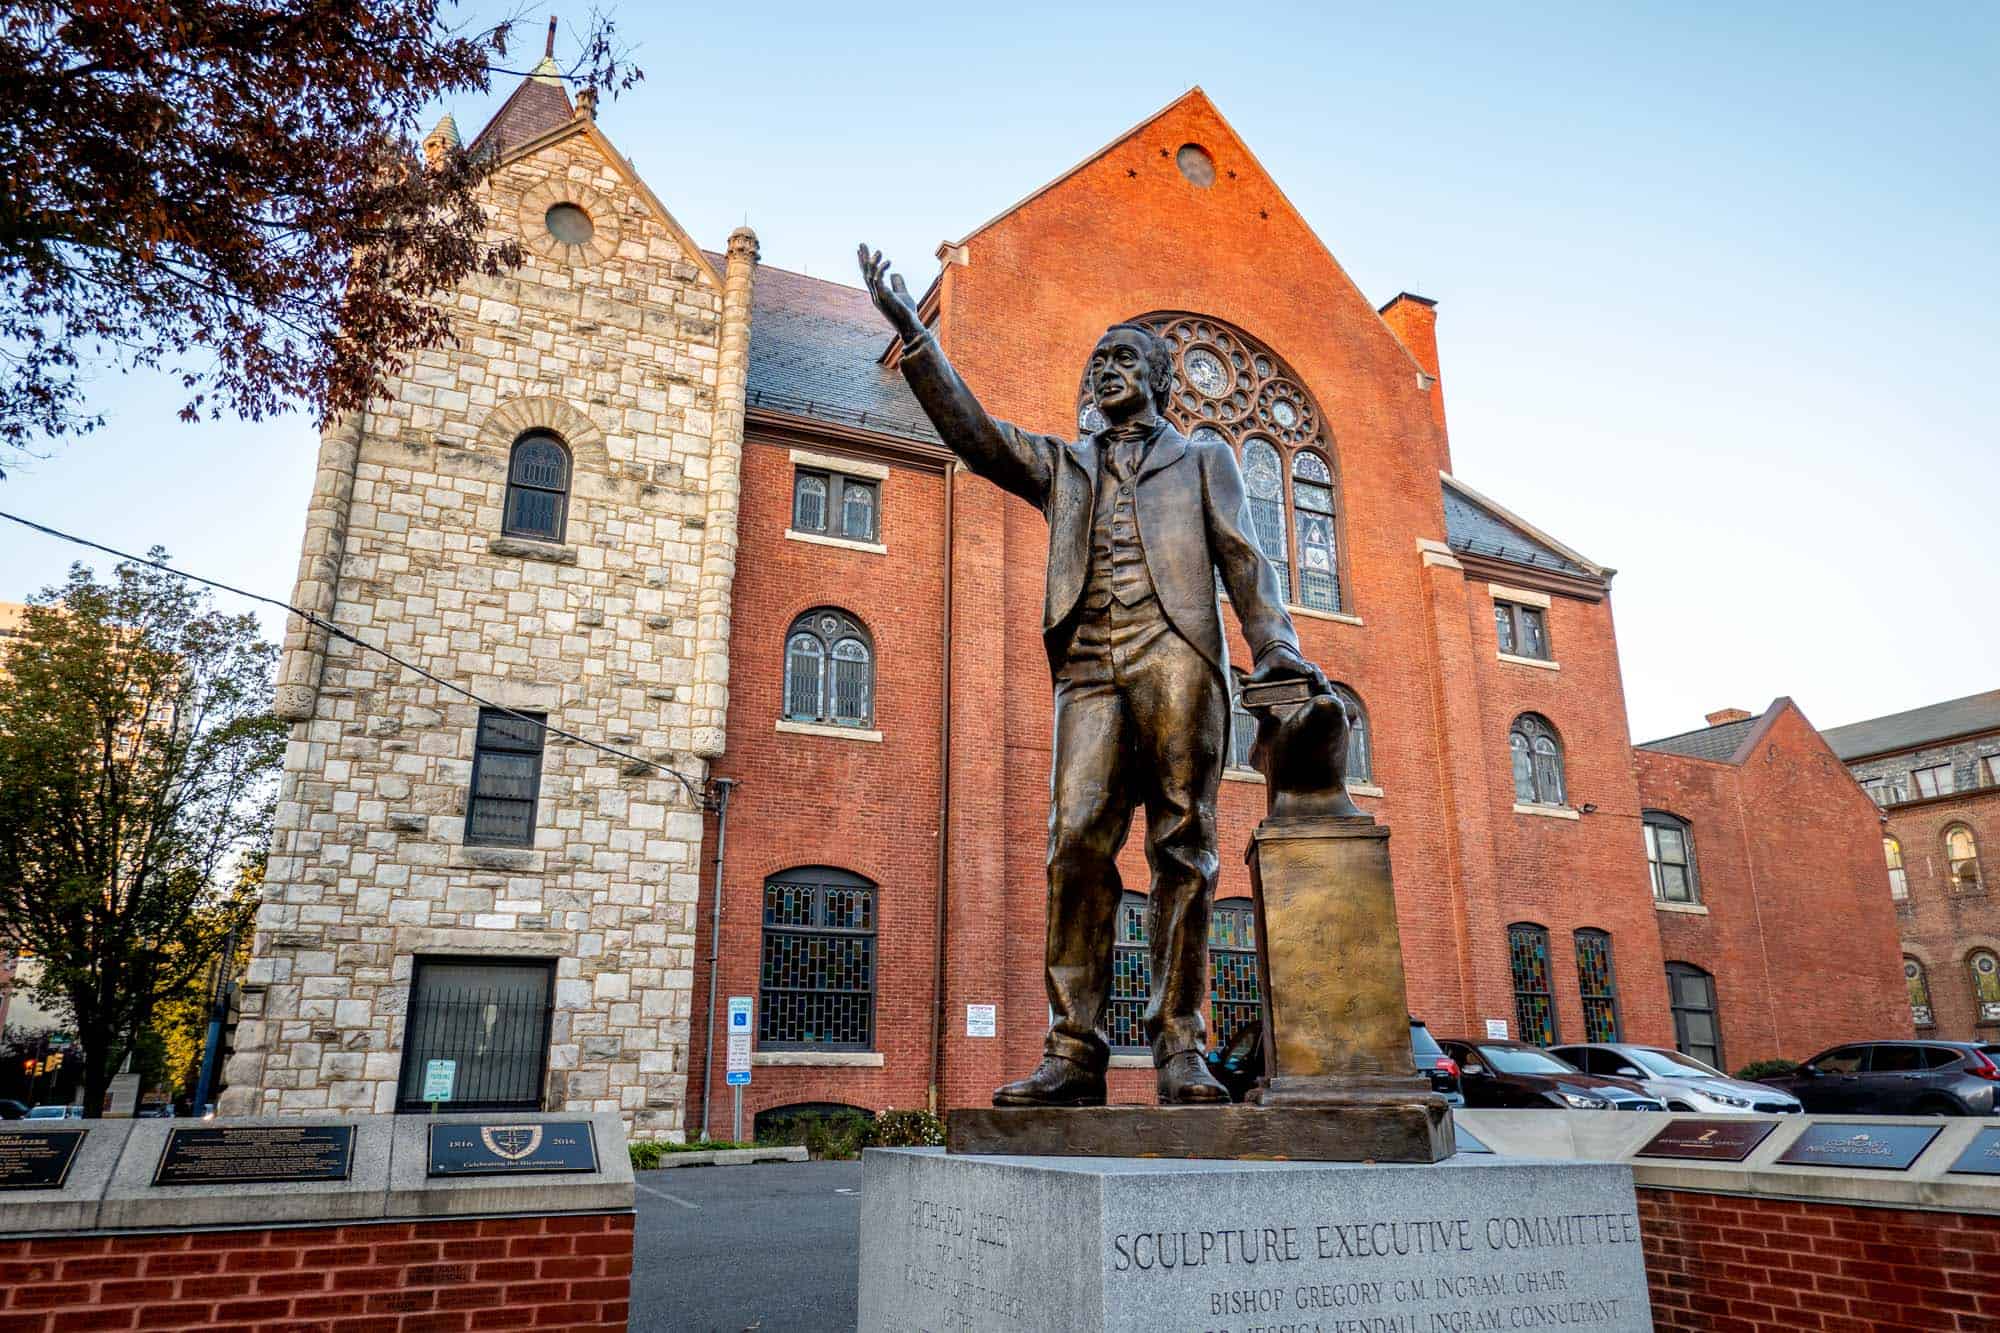 Bronze statue of a man outside a red brick church with stained glass windows.